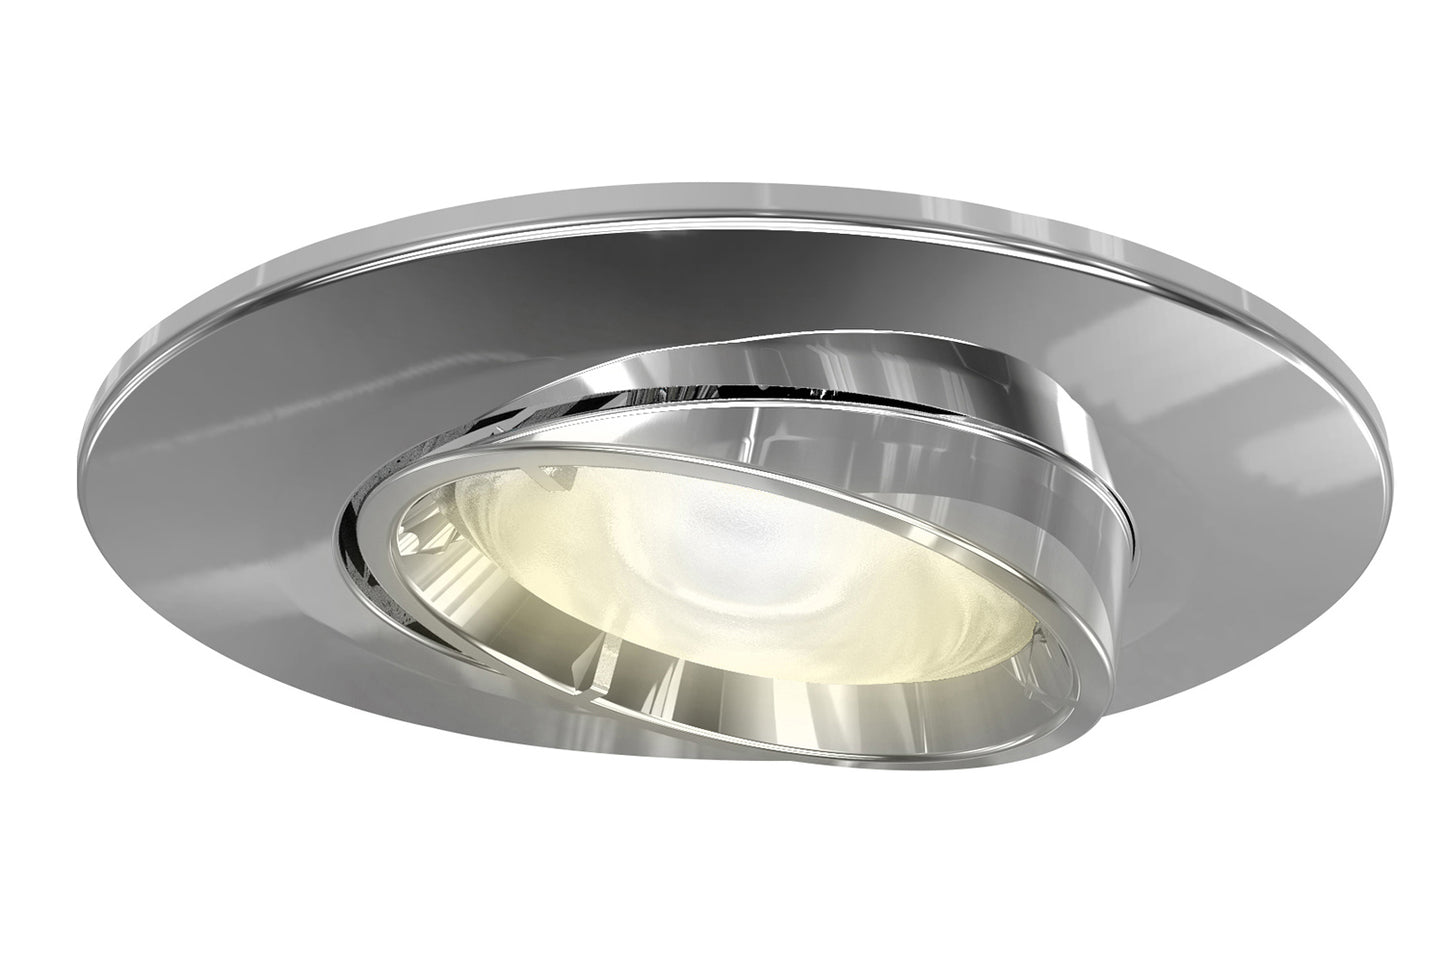 4lite WiZ Connected Fire-Rated IP20 GU10 Smart Adjustable LED Downlight - Chrome - maplin.co.uk